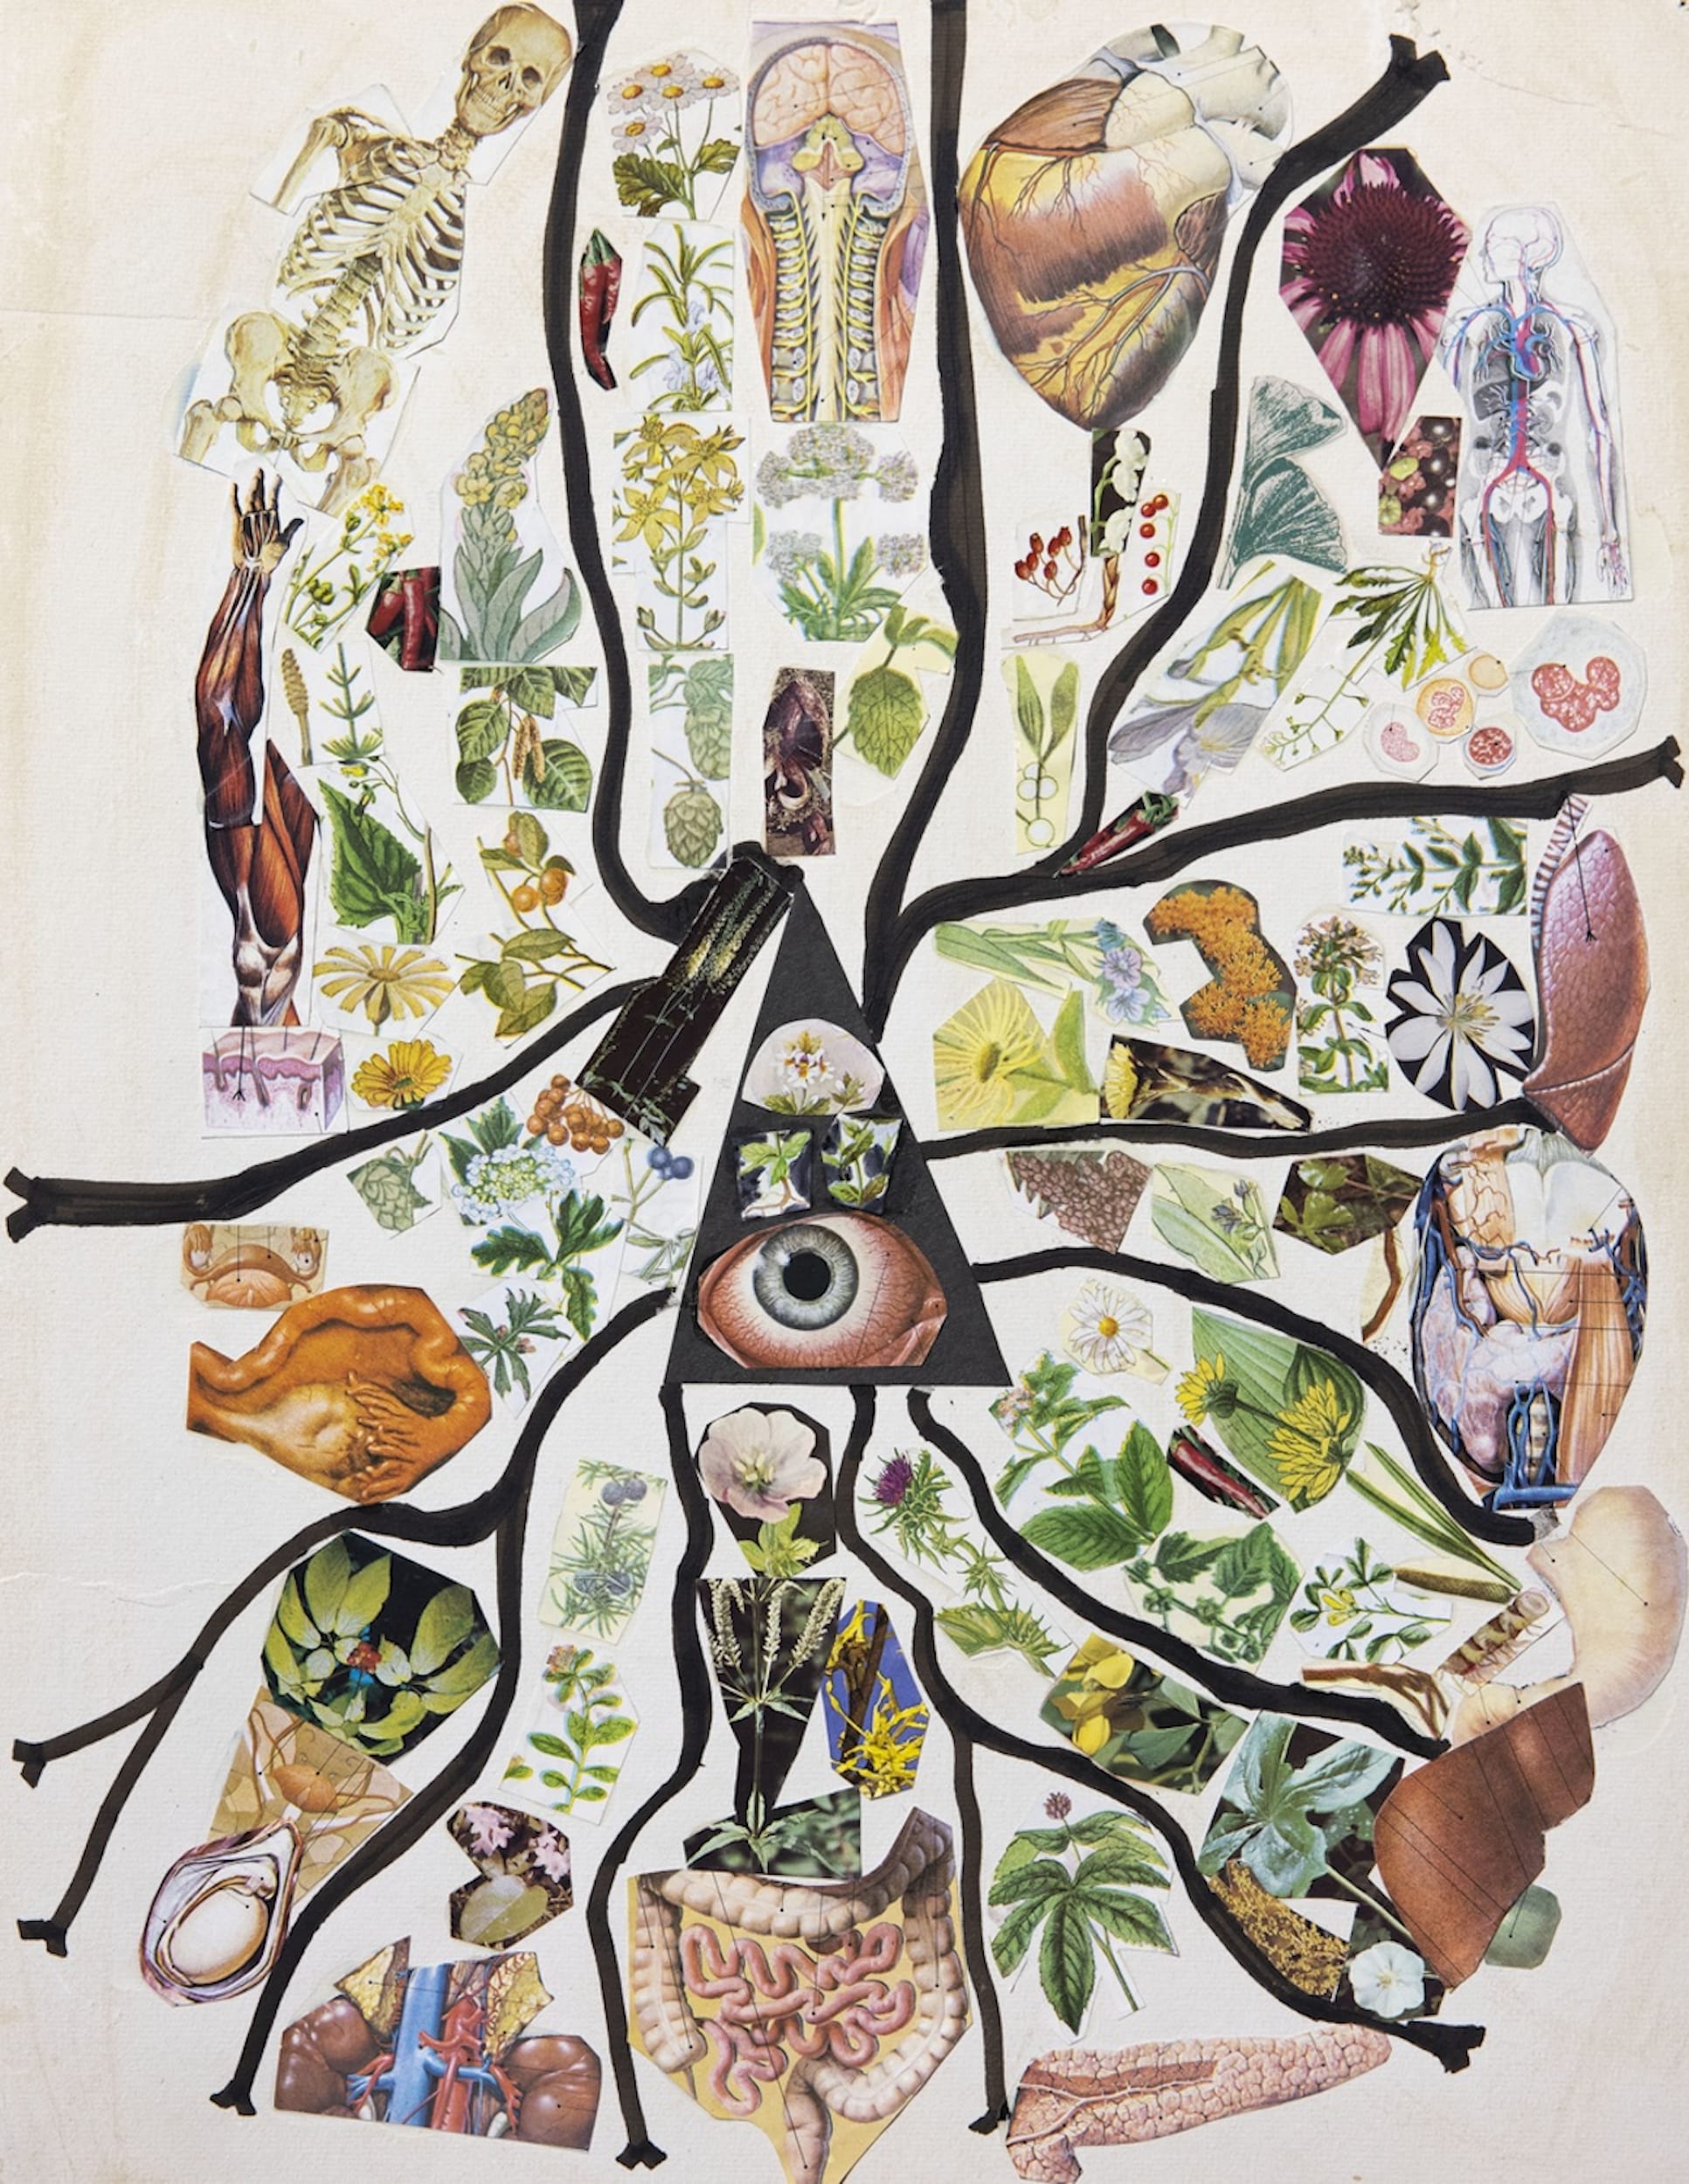 Milford Graves, Collage of Healing Herbs and Bodily Systems, 1994. Courtesy of the artist's estate and Fridman Gallery.